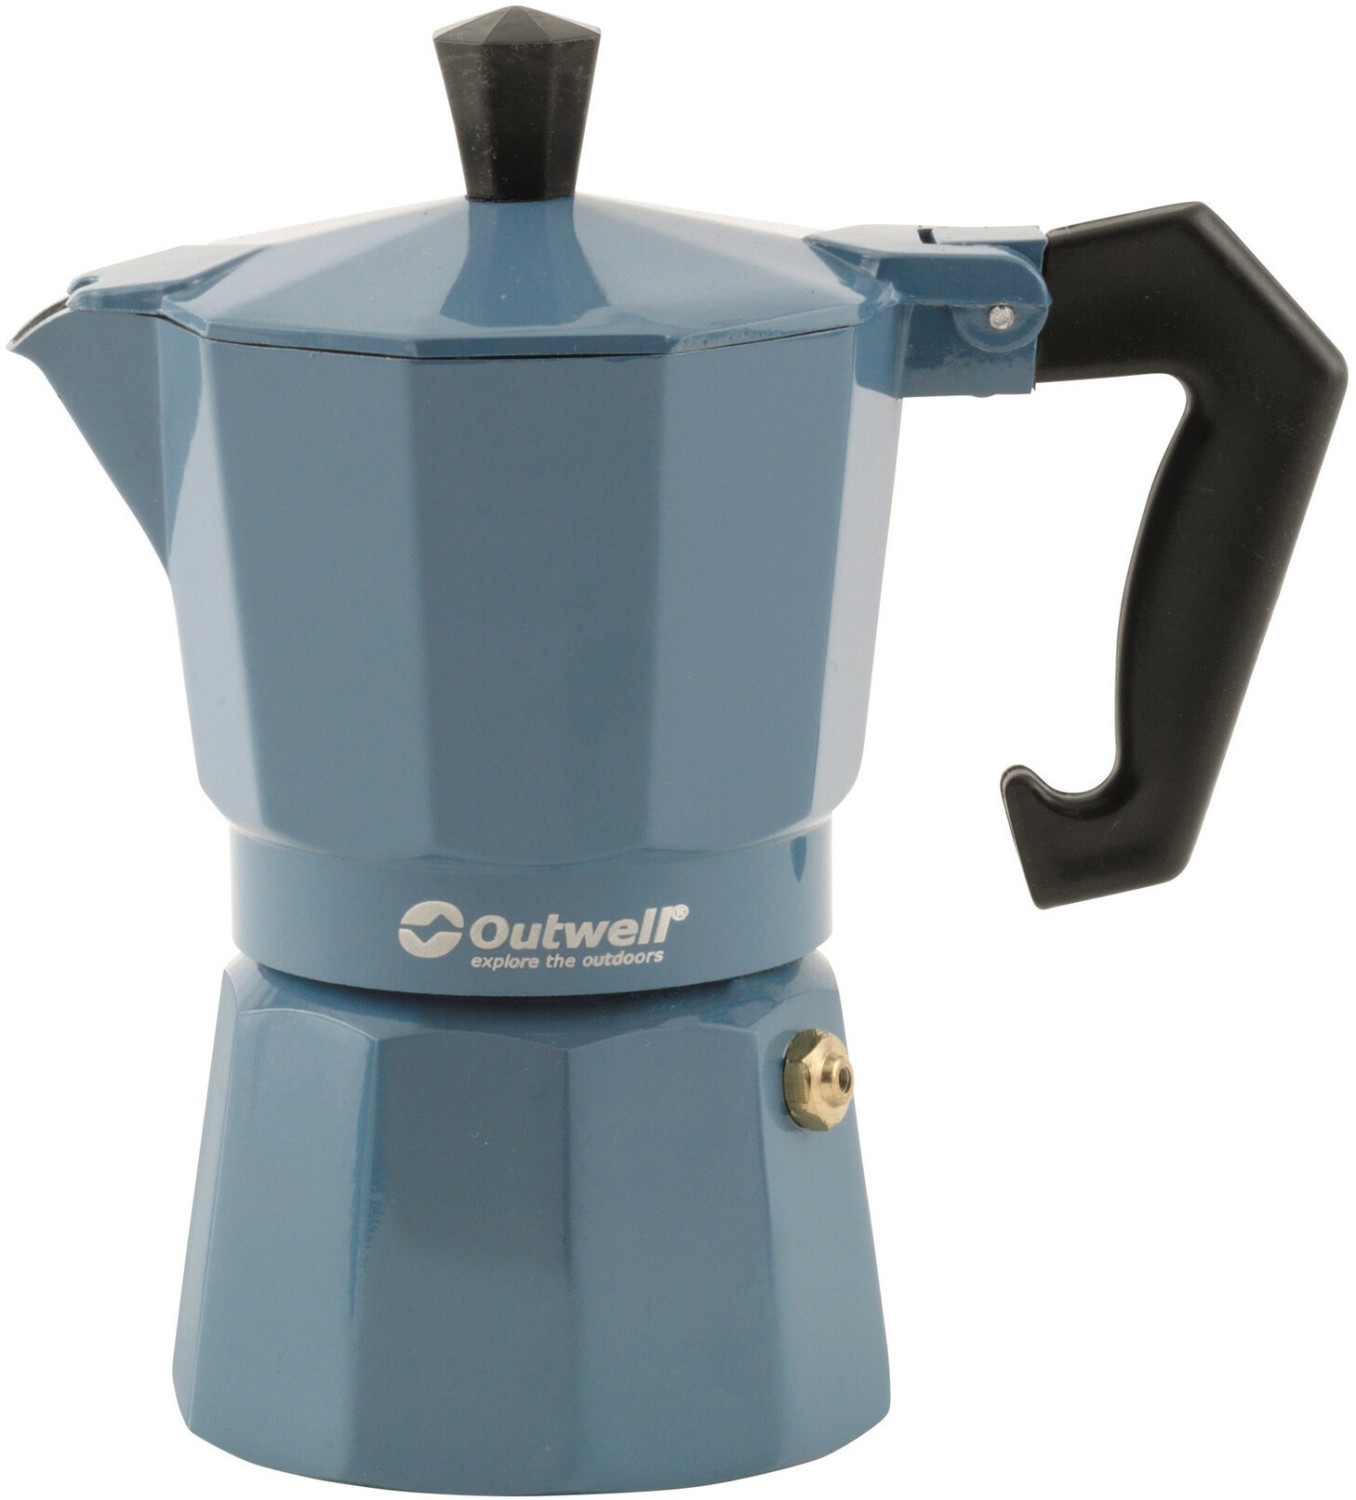 Photos - Other Camping Utensils Outwell Expresso Maker Manley M  (blue shadow)